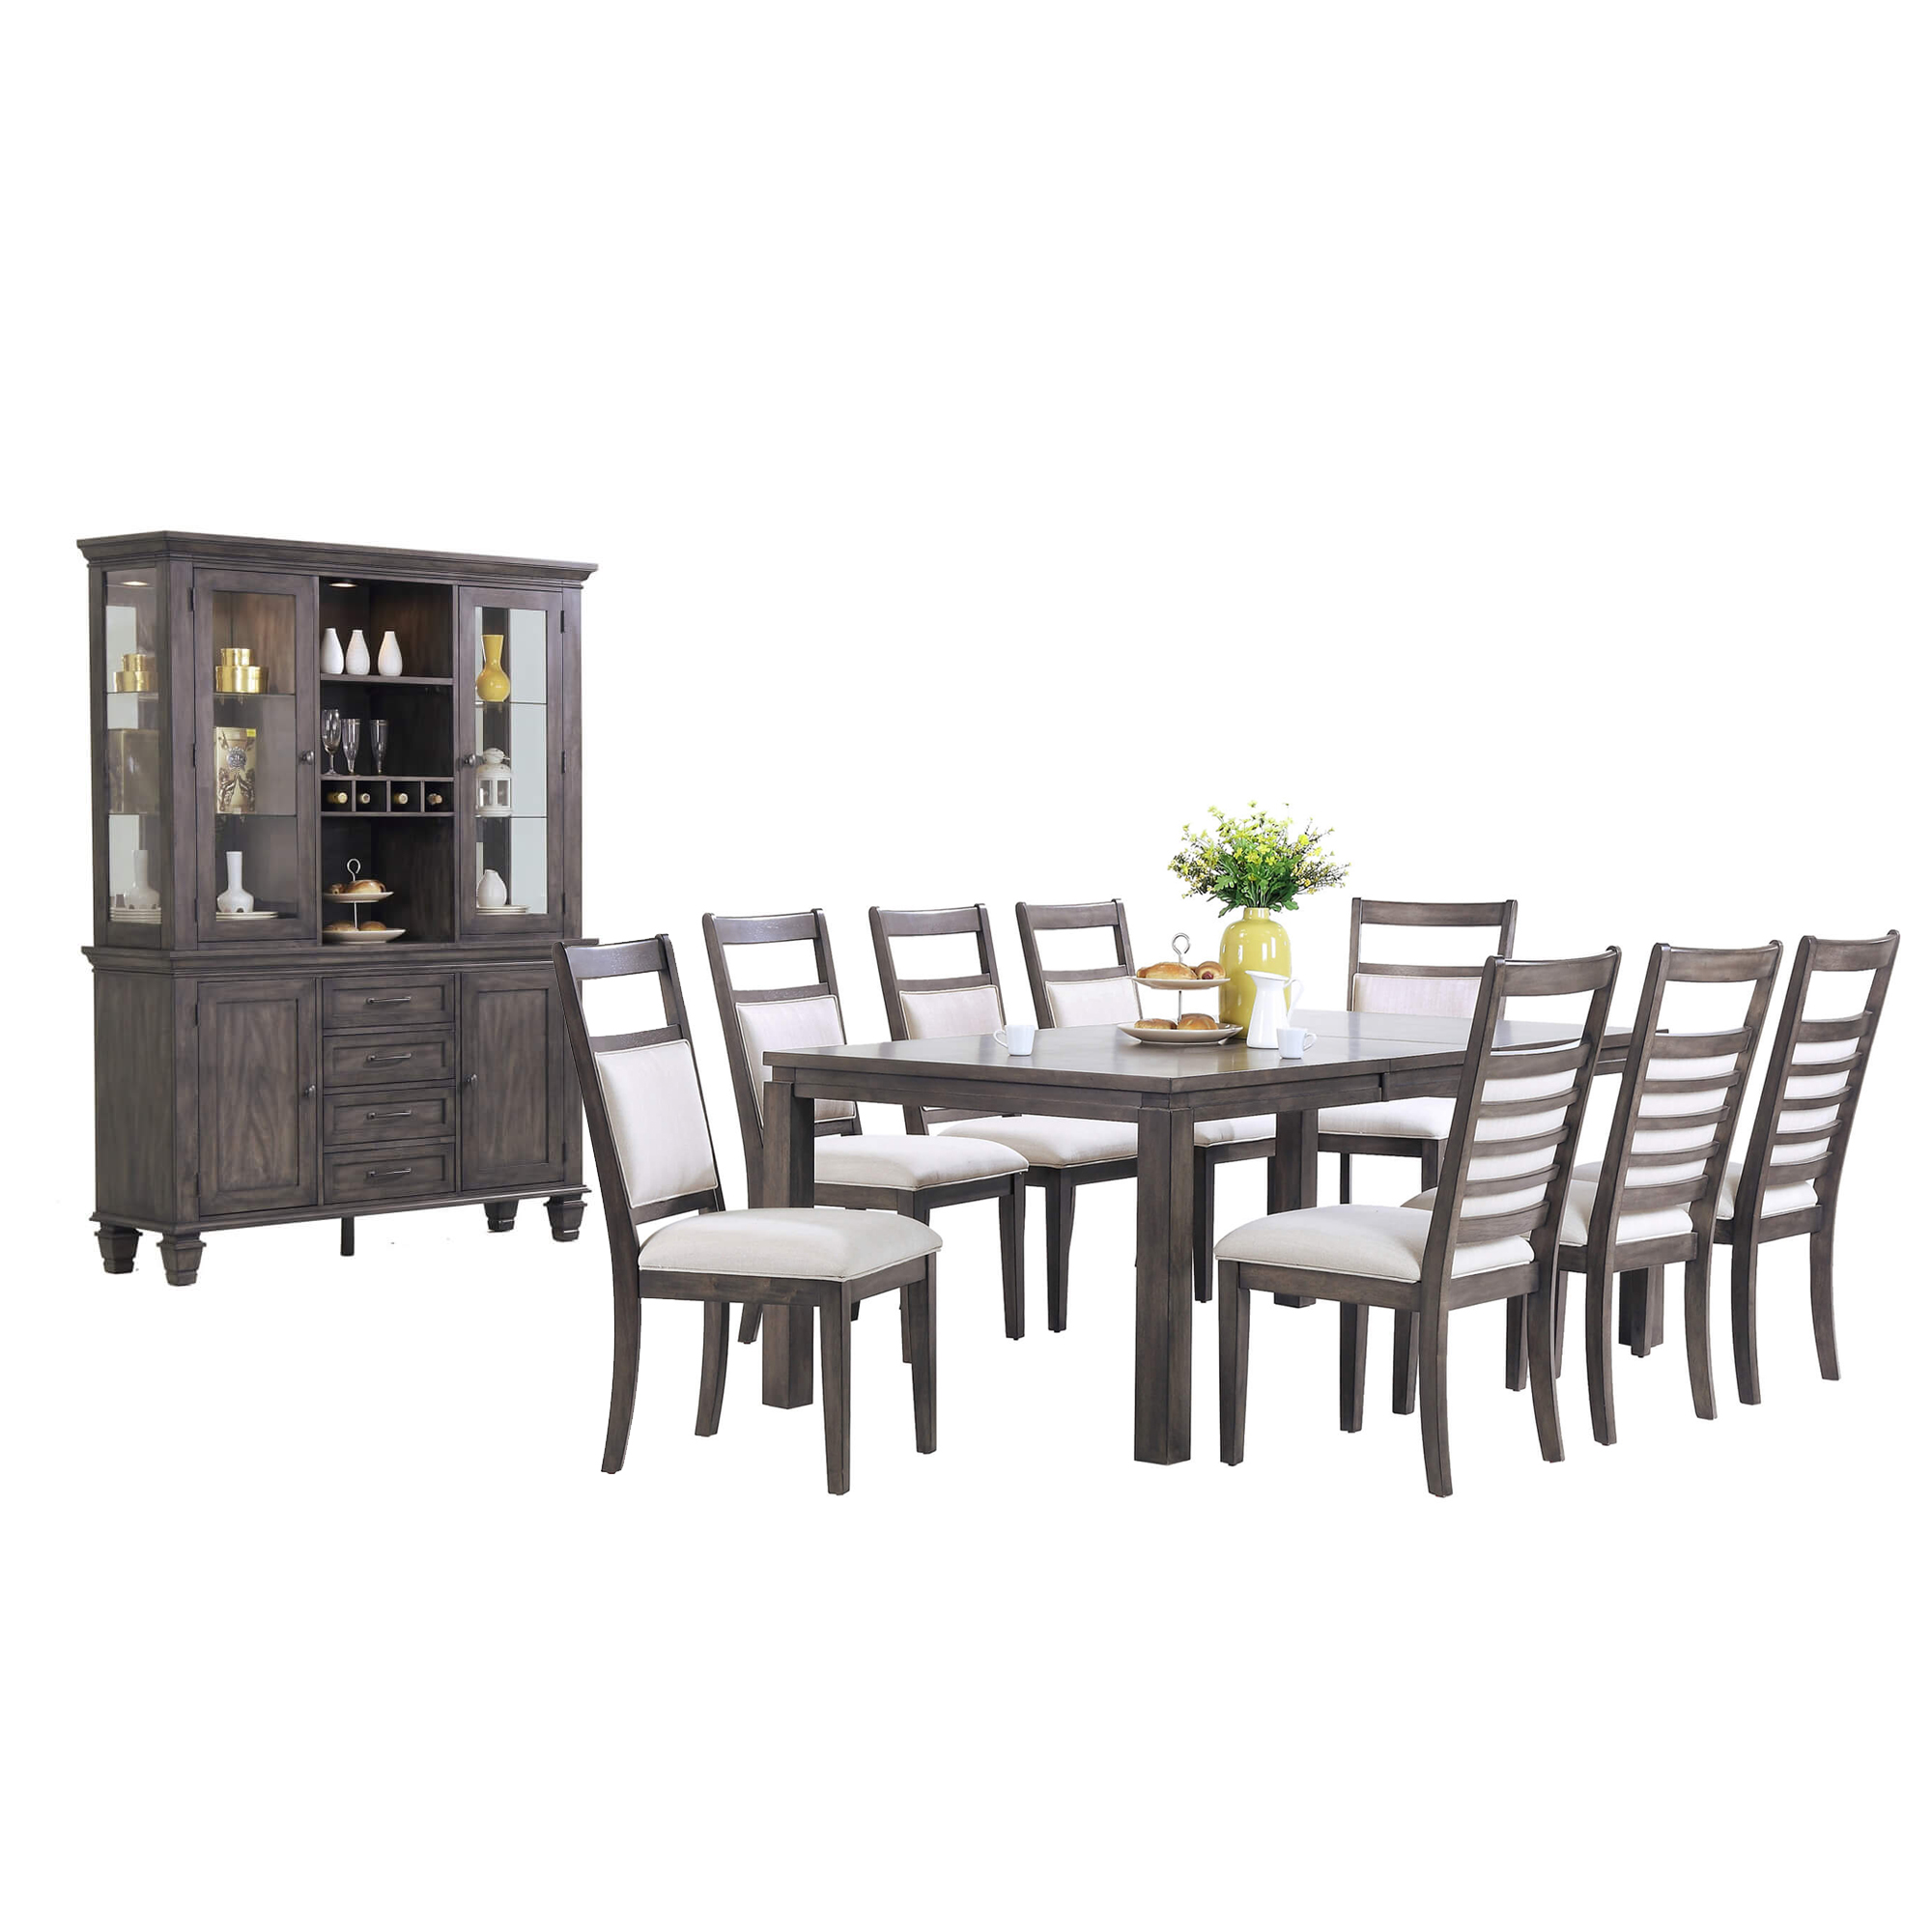 Dining Set With China Cabinet Shade, Dining Room Set With China Cabinet And Buffet